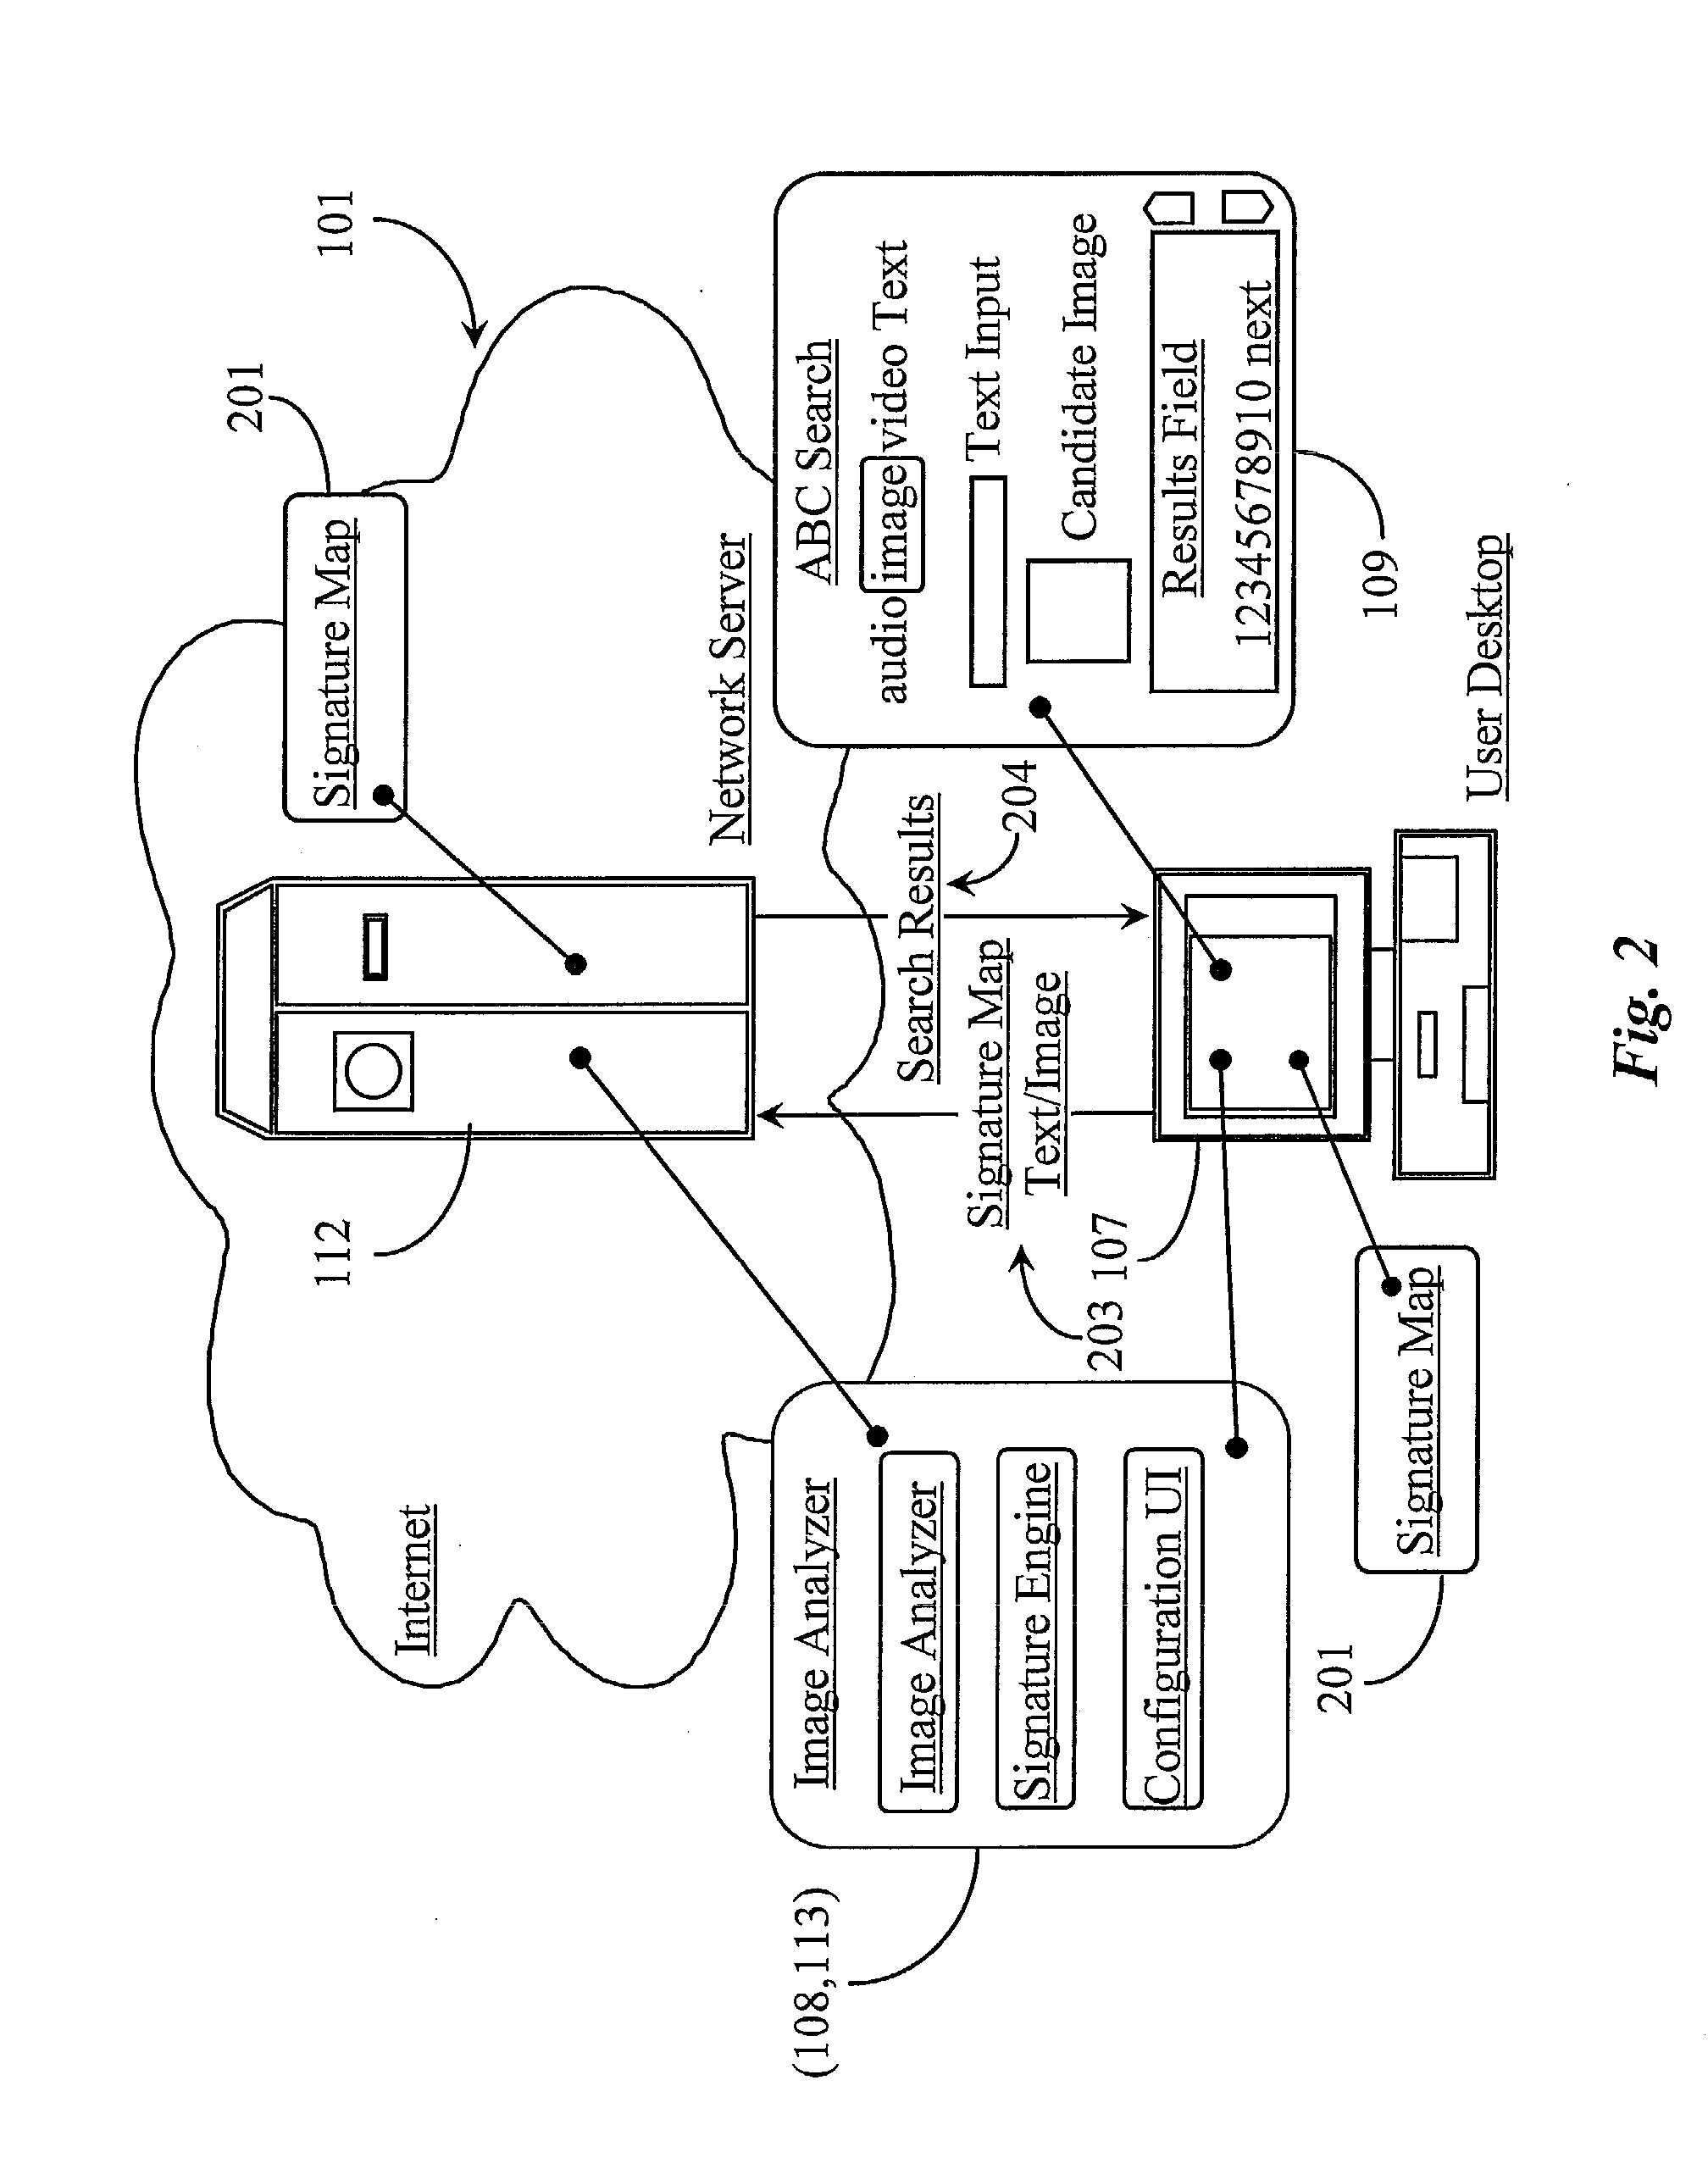 Method and Apparatus for Searching Images through a Search Engine Interface Using Image Data and Constraints as Input